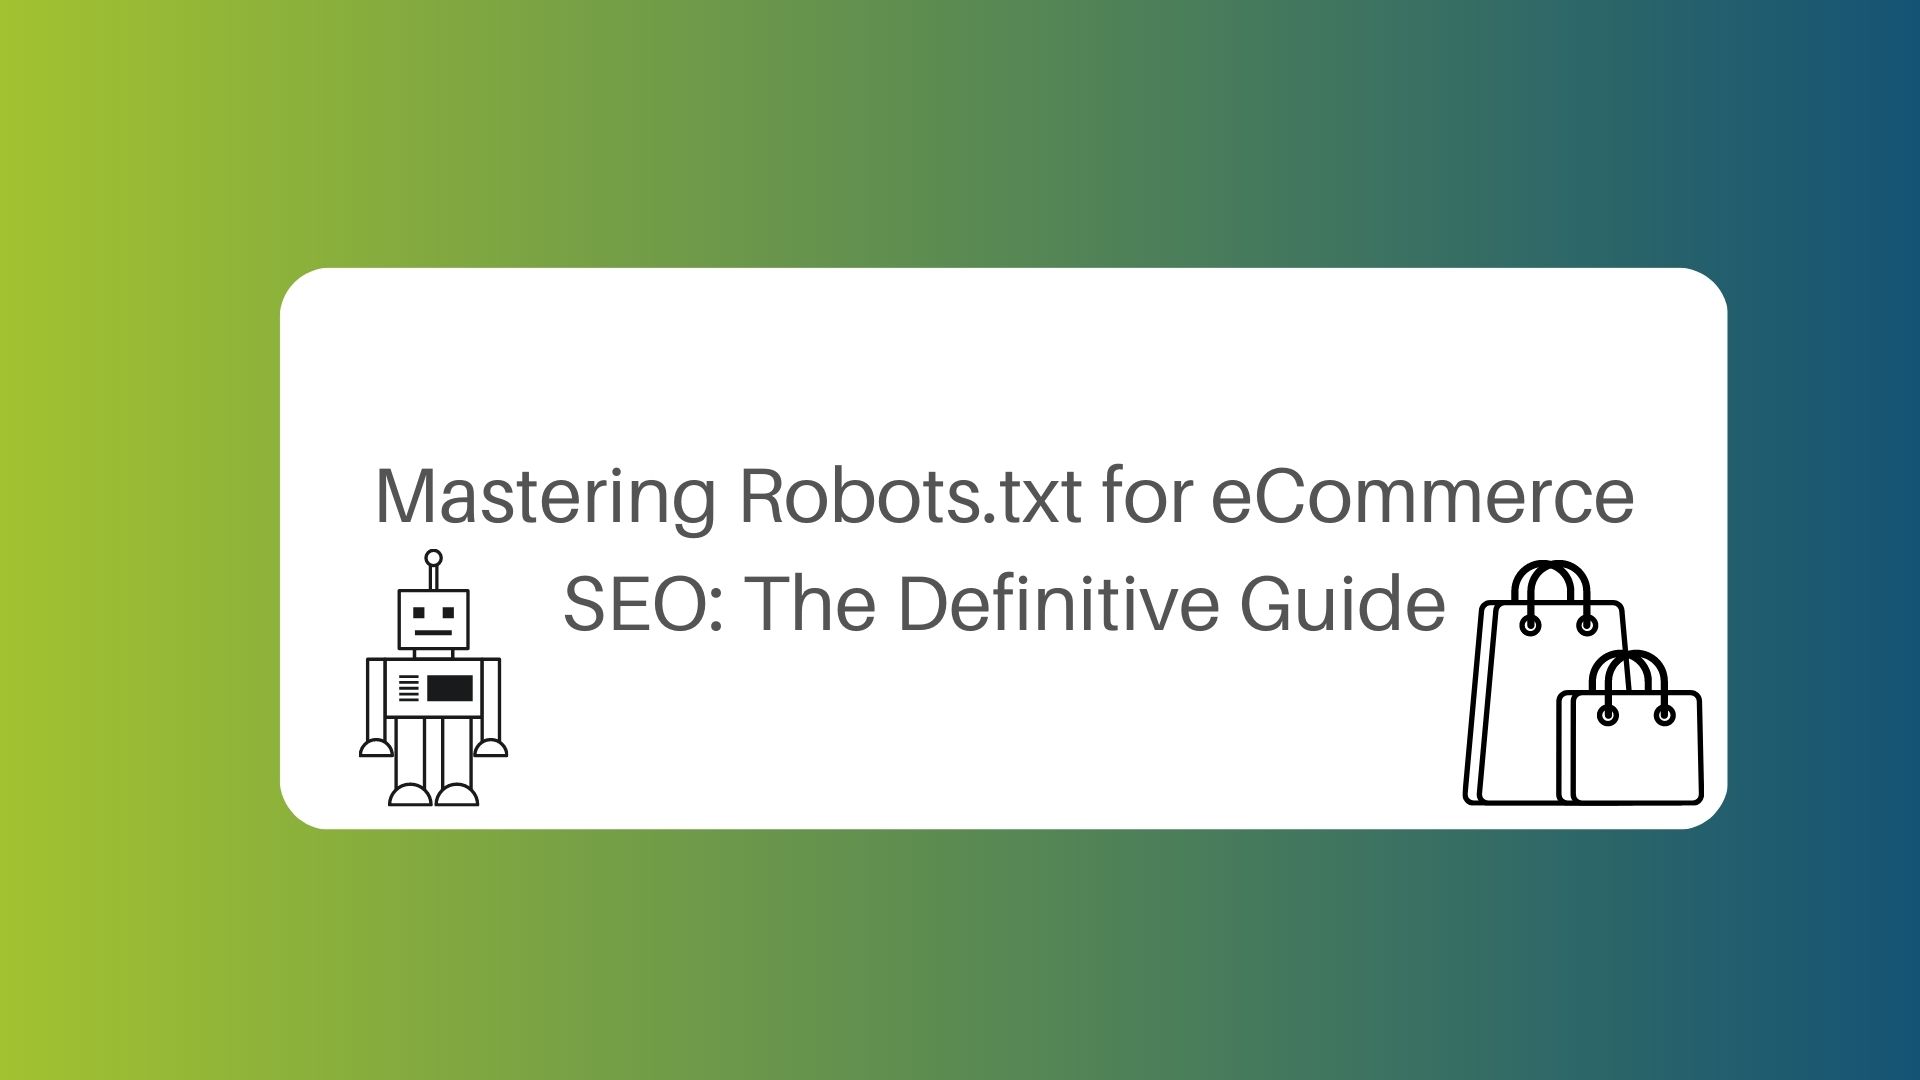 Mastering Robots.txt for eCommerce